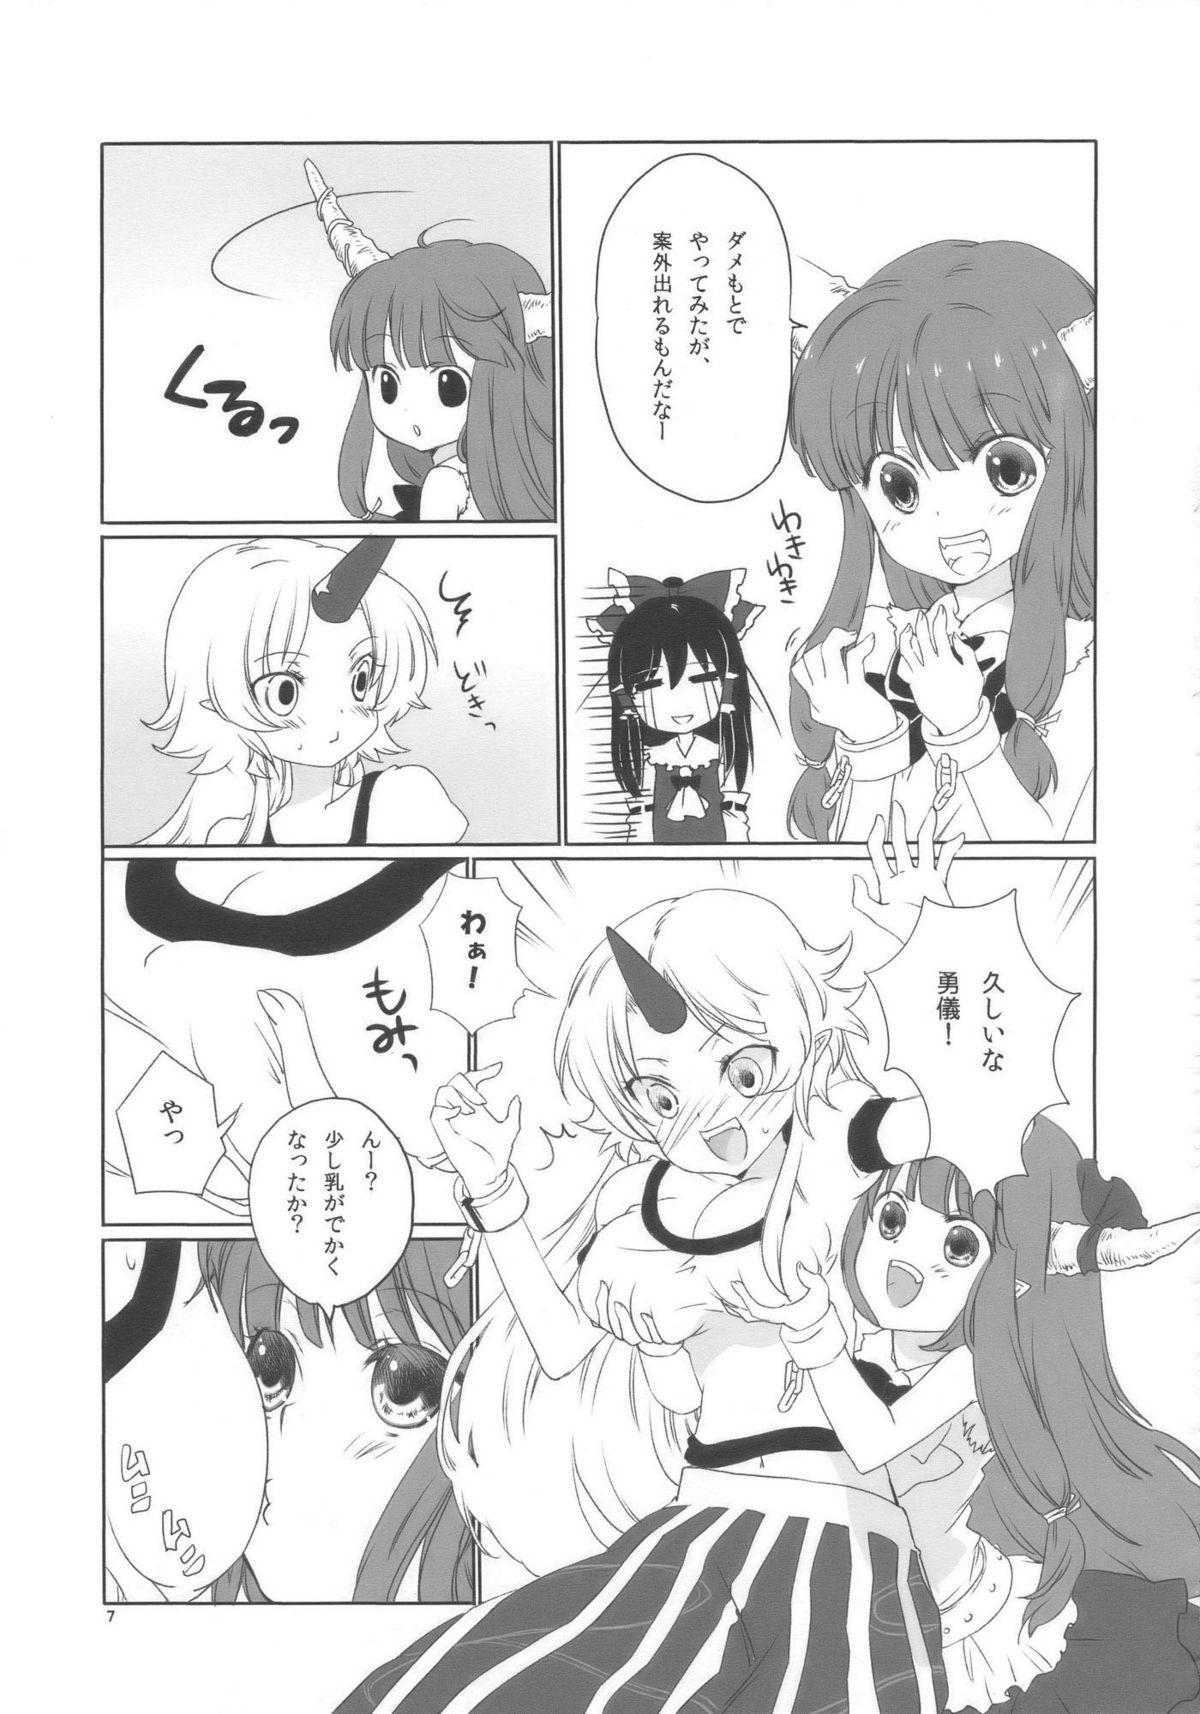 Old Vs Young Oni ha Ore no Yome! - Touhou project Edging - Page 7